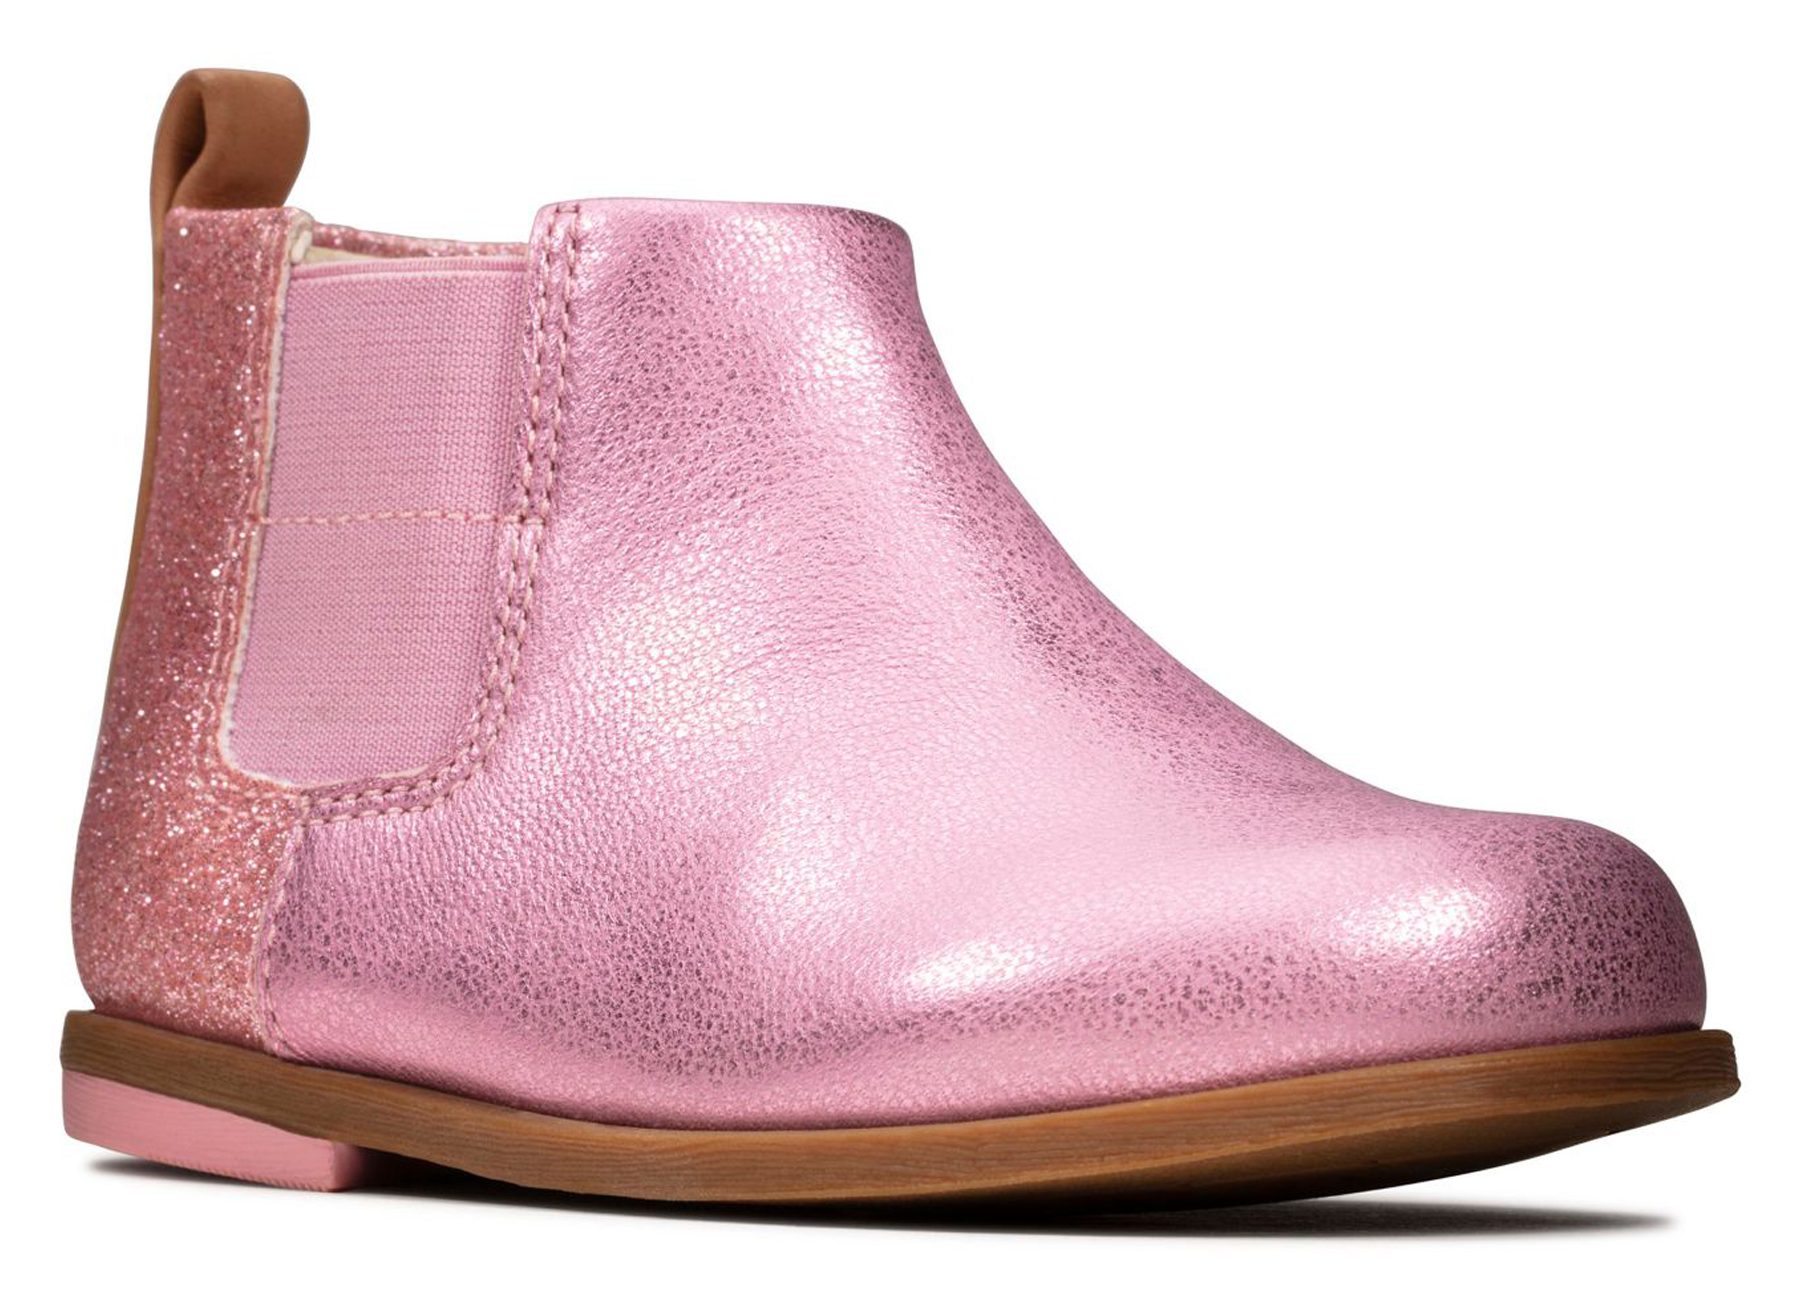 Clarks Drew Fun Toddler Pink Sparkle Leather 26145418 - Girls Boots ...